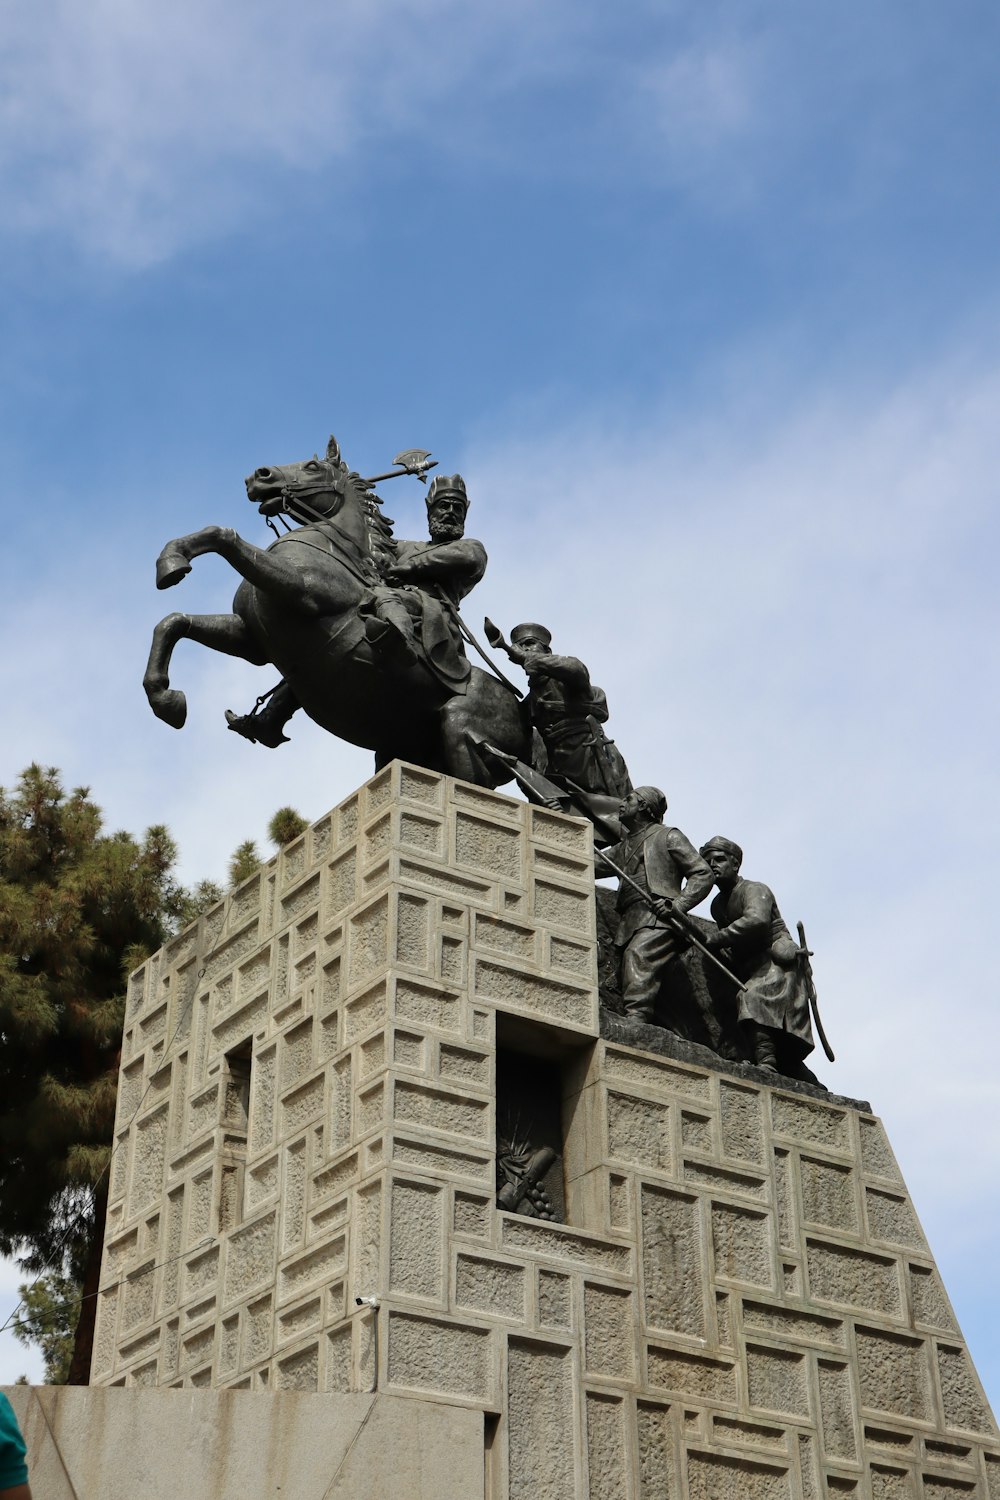 a statue of a man riding a horse with a group of people on it